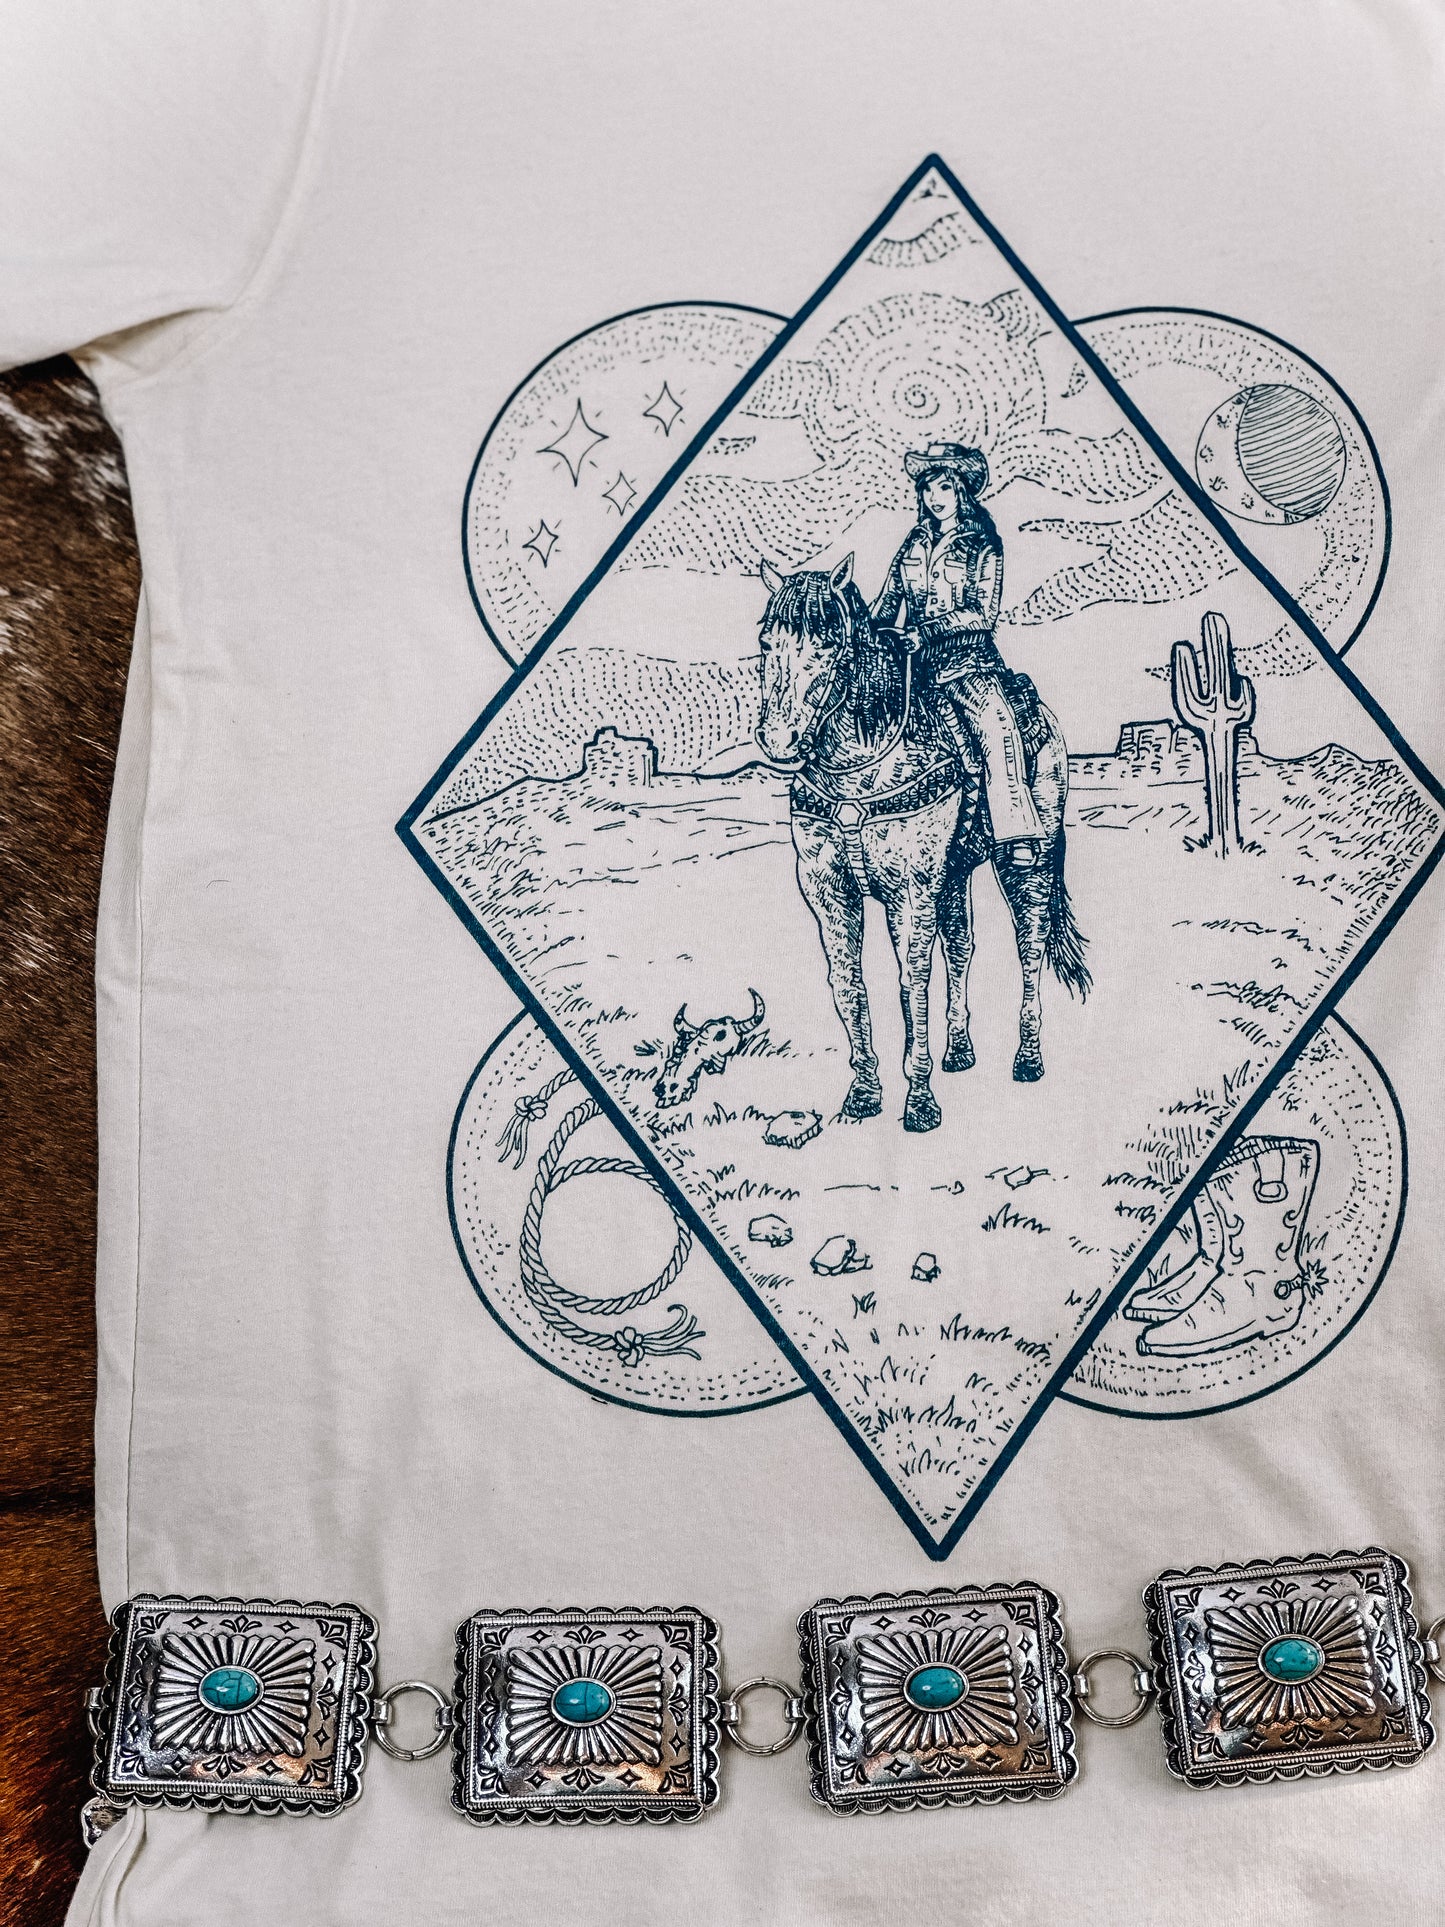 The Long Live Cowgirls Tee